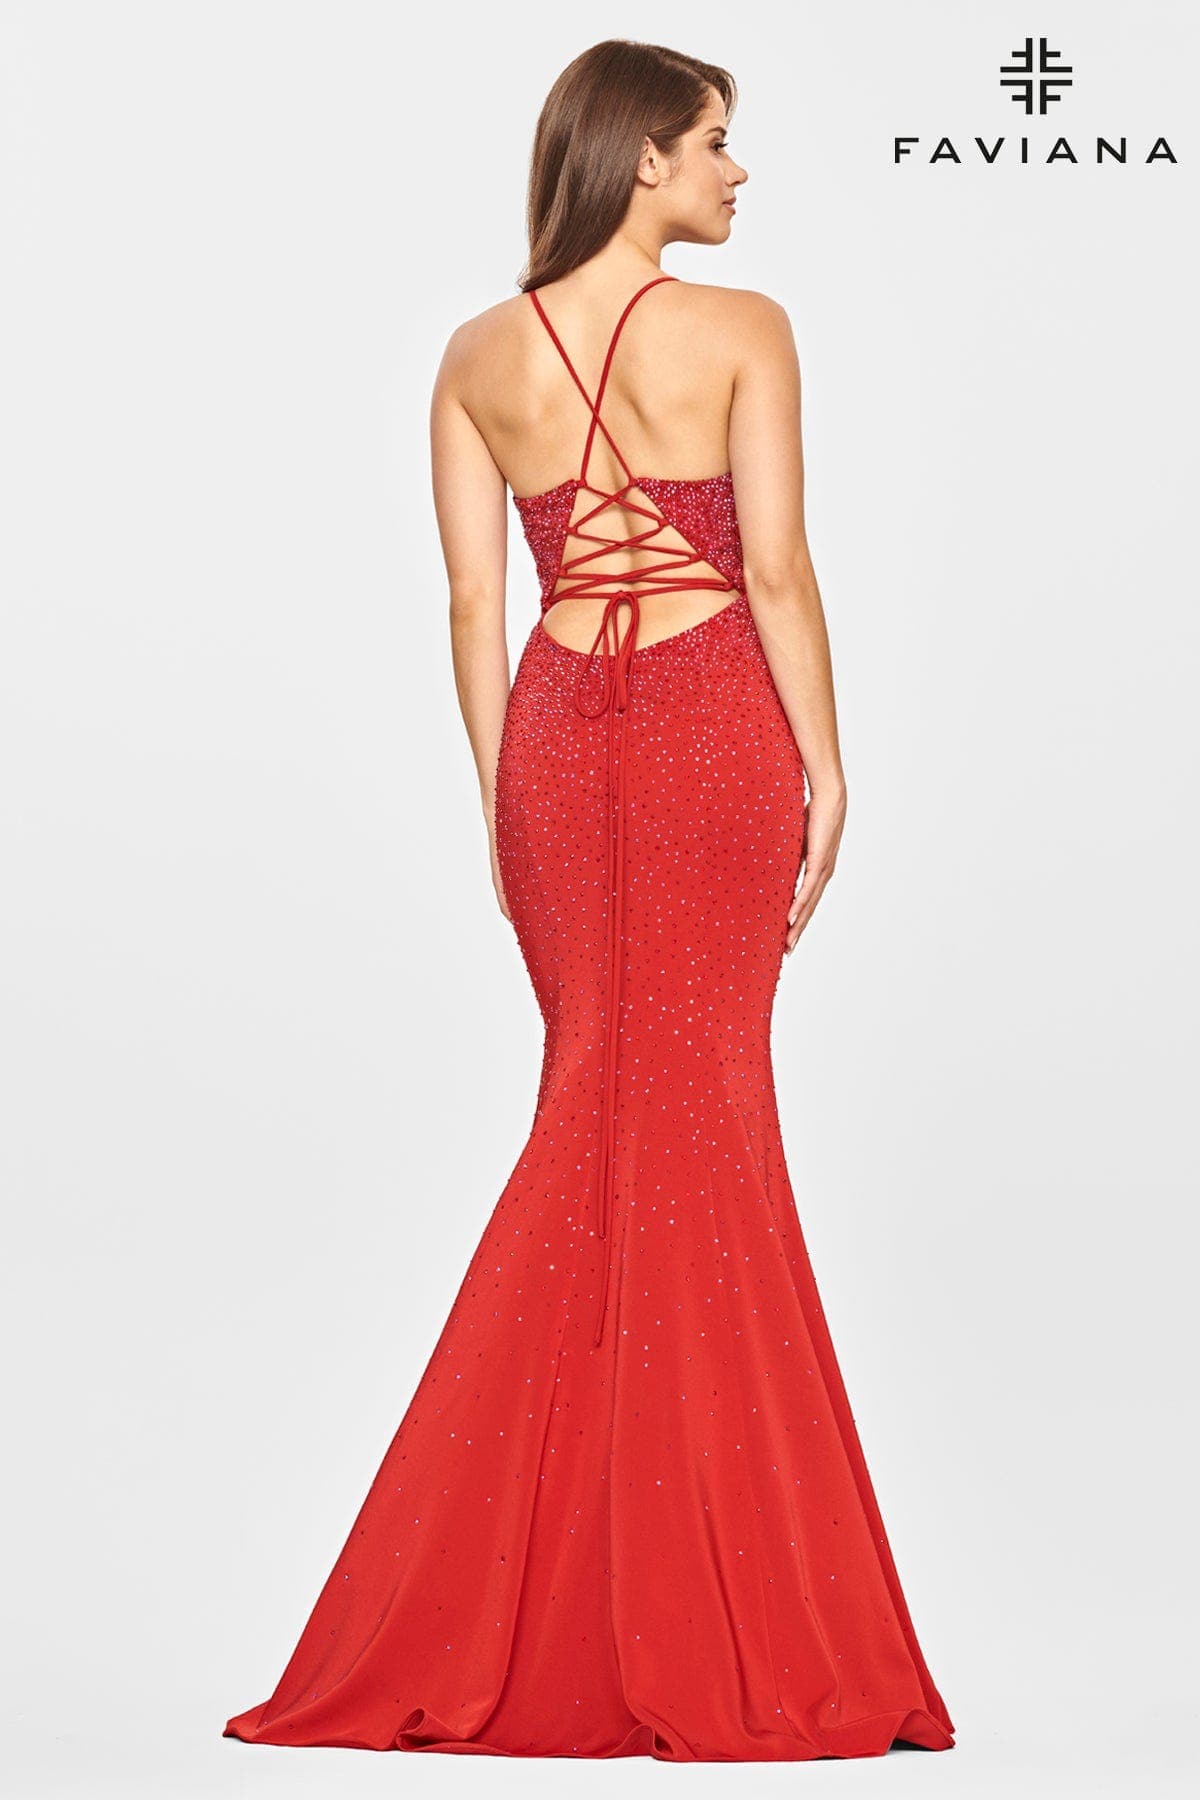 Red Sweetheart Neckline Long Dress With Rhinestone Beading And Corset Back